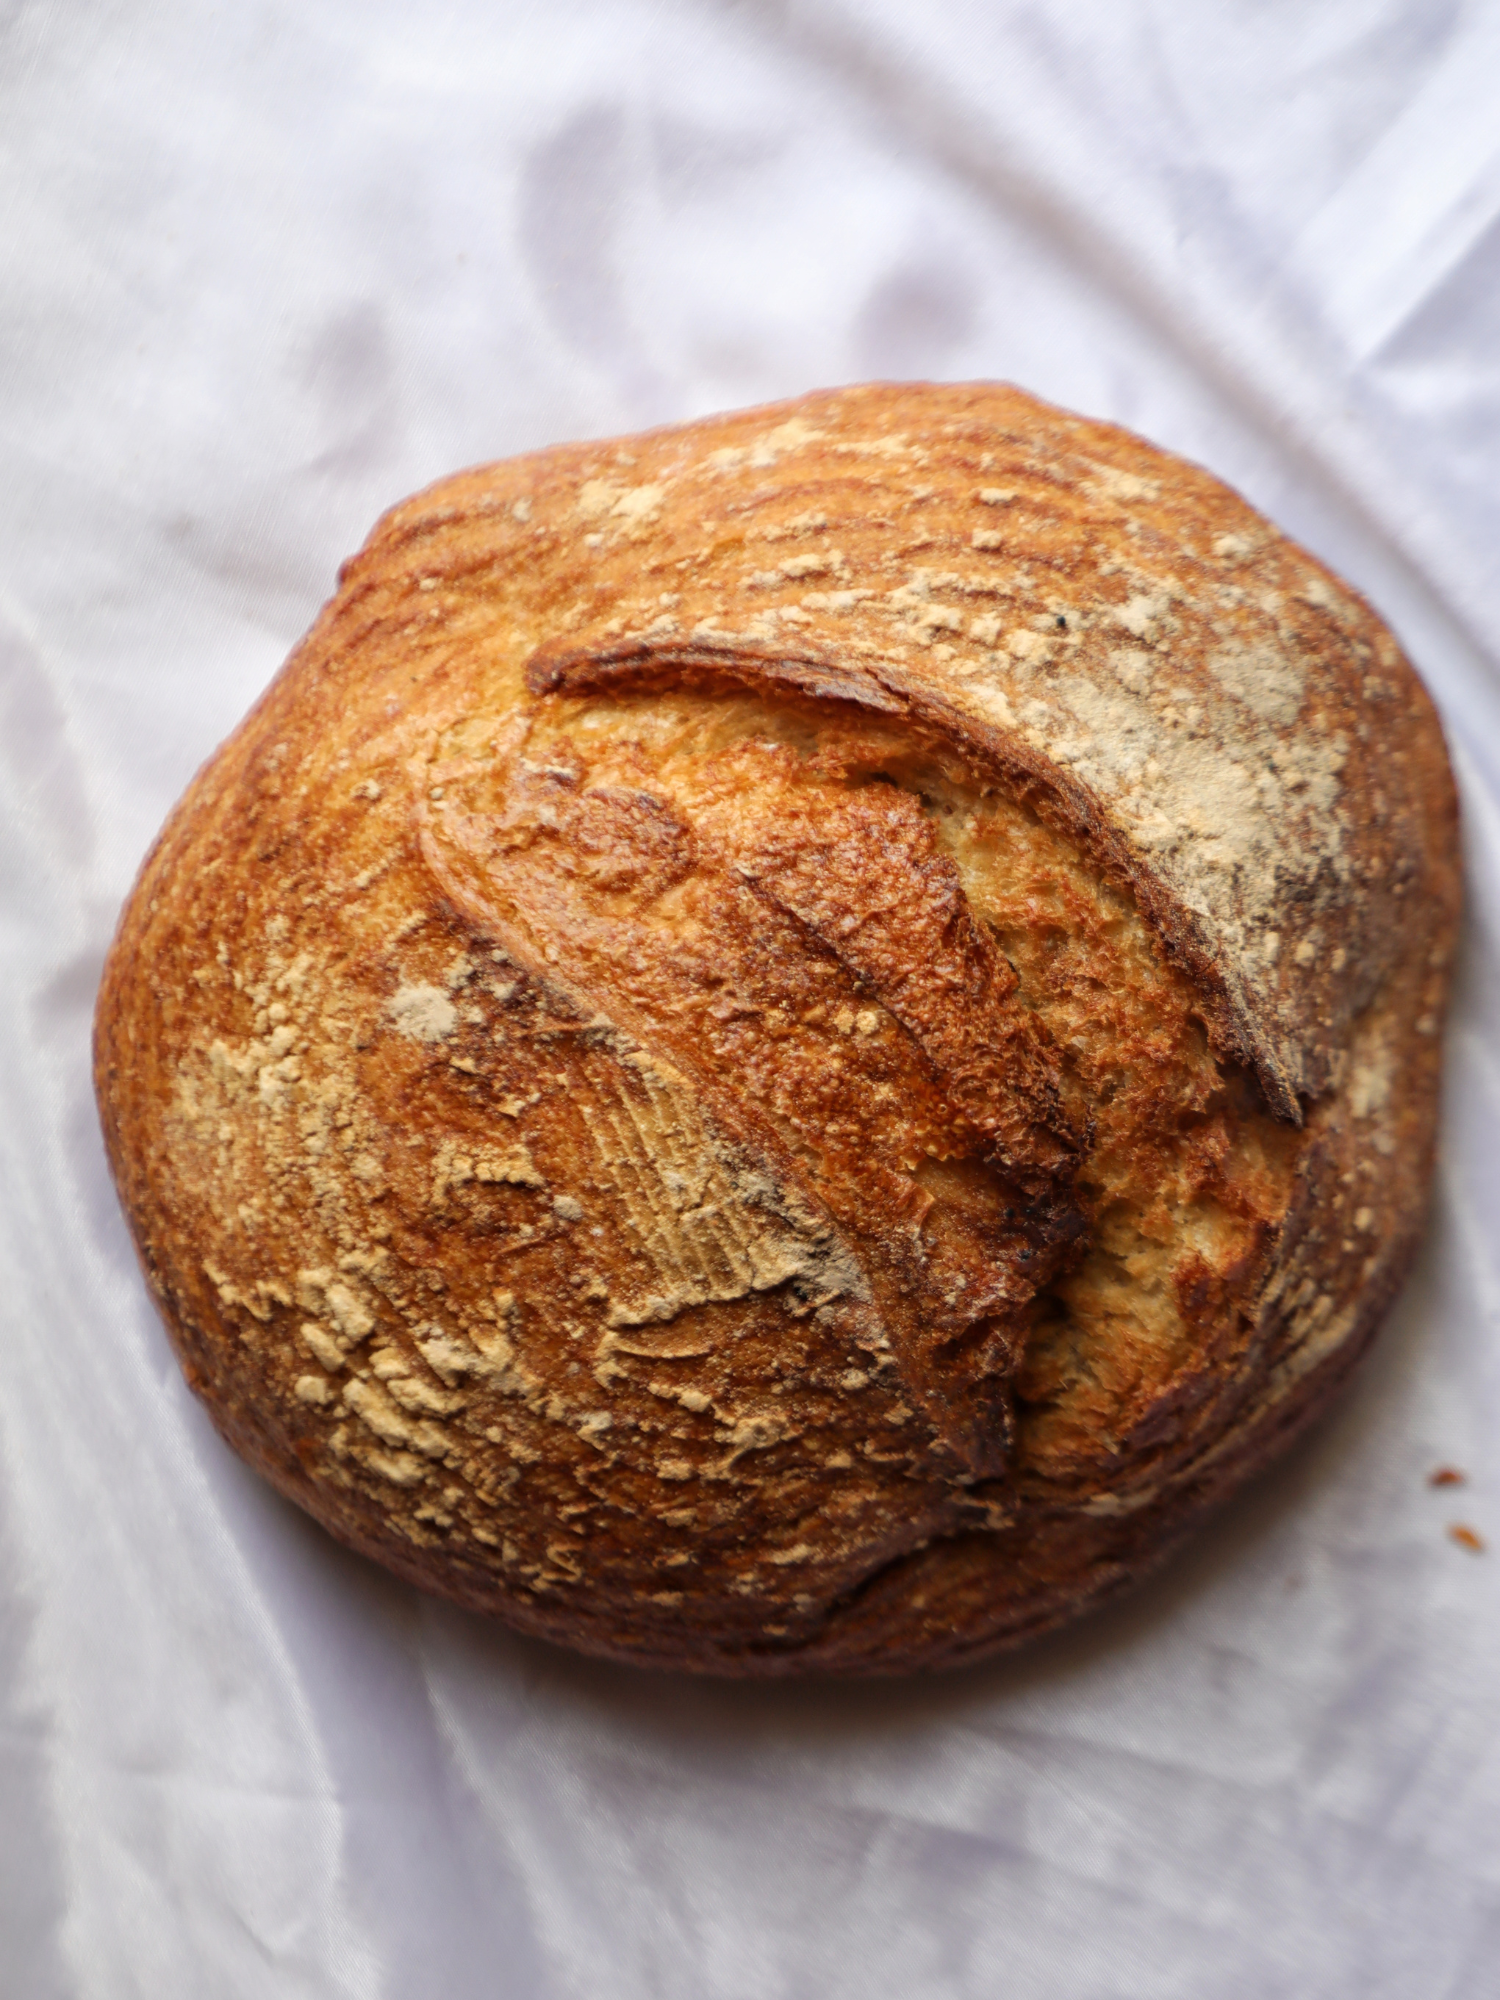 a loaf of sourdough bread that is good for acid reflux